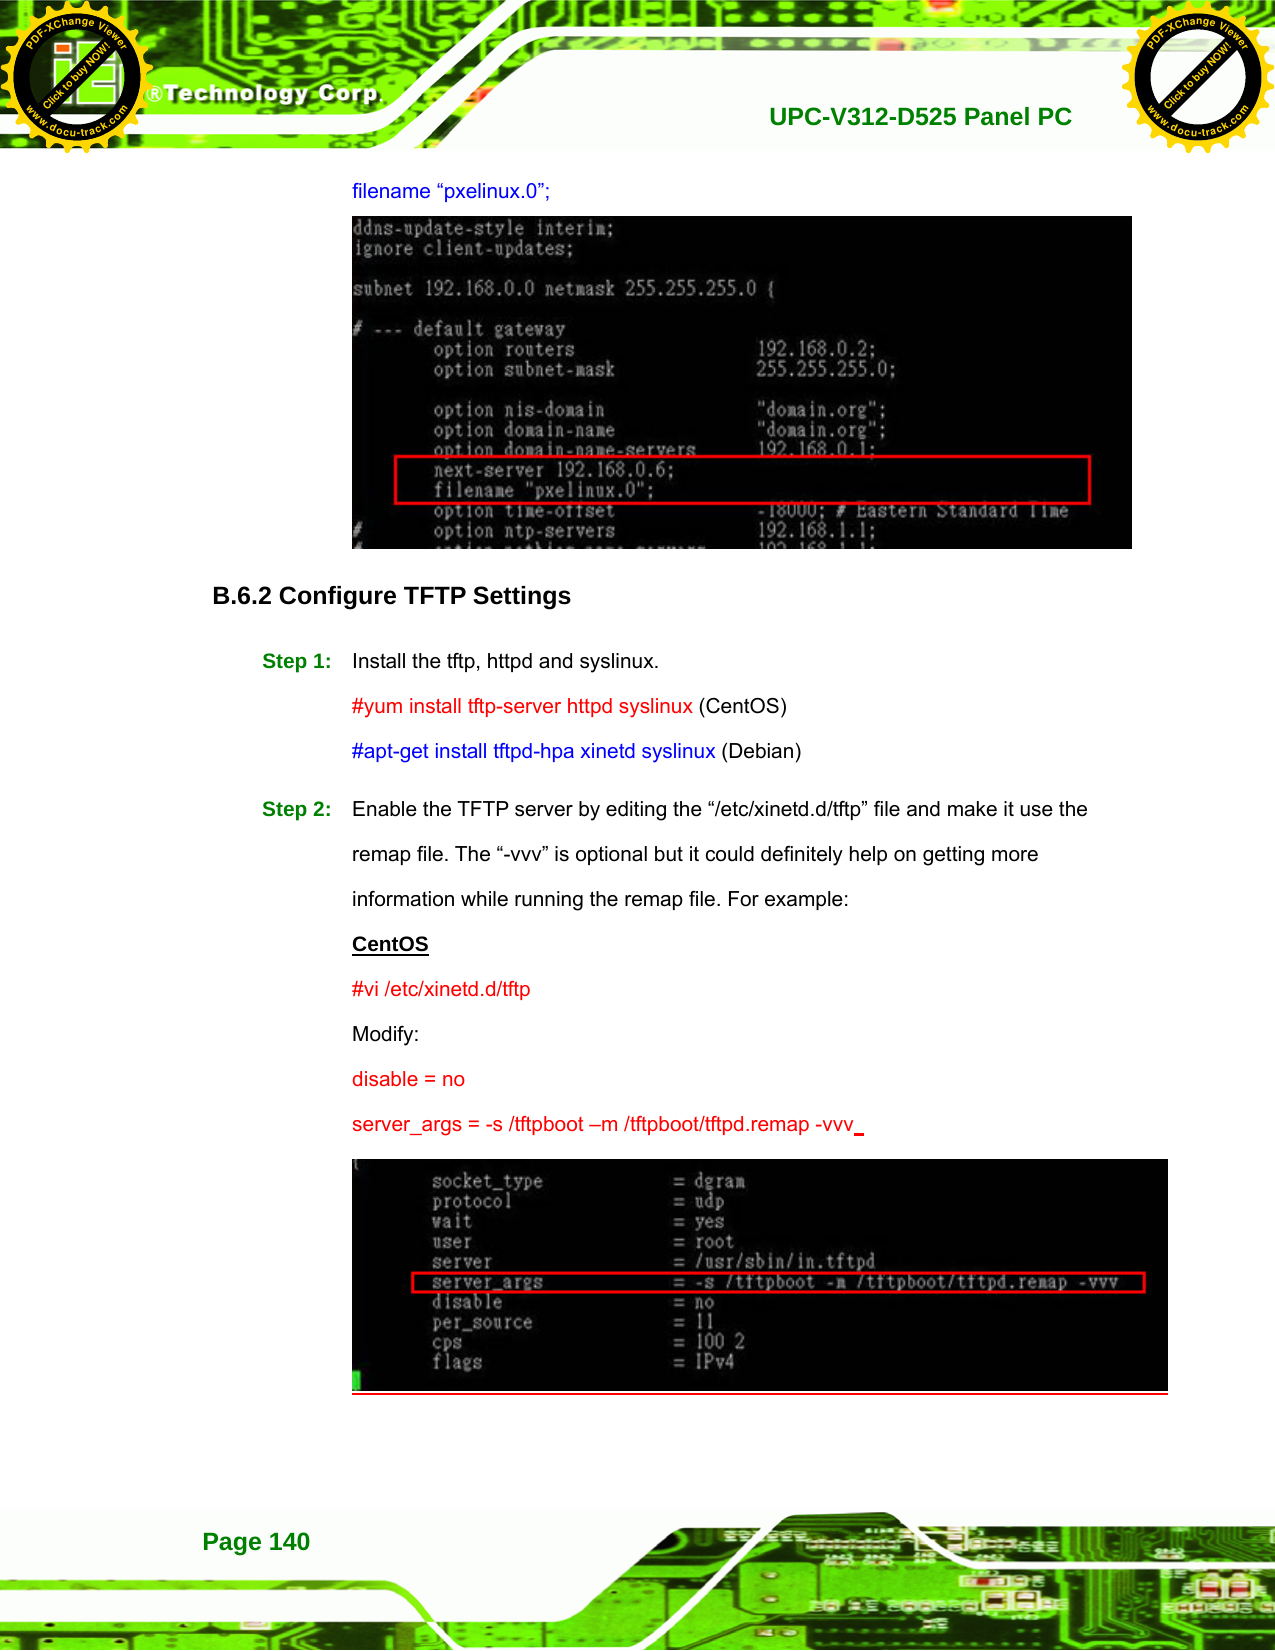   UPC-V312-D525 Panel PCPage 140 filename “pxelinux.0”;  B.6.2 Configure TFTP Settings Step 1:  Install the tftp, httpd and syslinux. #yum install tftp-server httpd syslinux (CentOS) #apt-get install tftpd-hpa xinetd syslinux (Debian) Step 2:  Enable the TFTP server by editing the “/etc/xinetd.d/tftp” file and make it use the remap file. The “-vvv” is optional but it could definitely help on getting more information while running the remap file. For example:   CentOS #vi /etc/xinetd.d/tftp Modify: disable = no server_args = -s /tftpboot –m /tftpboot/tftpd.remap -vvv   Click to buy NOW!PDF-XChange Viewerwww.docu-track.comClick to buy NOW!PDF-XChange Viewerwww.docu-track.com